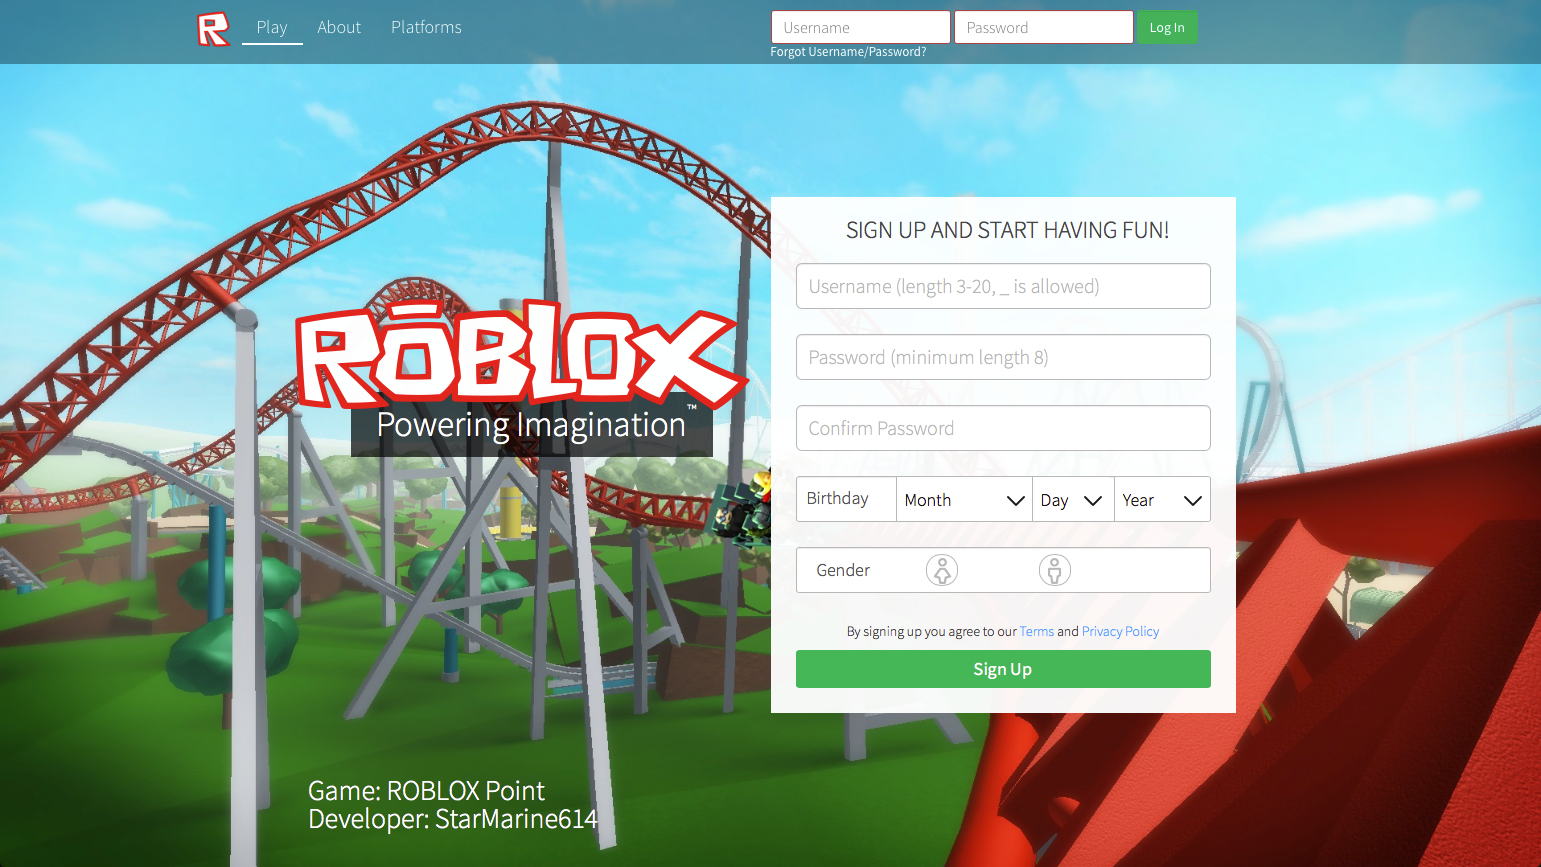 The ROBLOX Platform on Web (Under-13 Player Experience) is